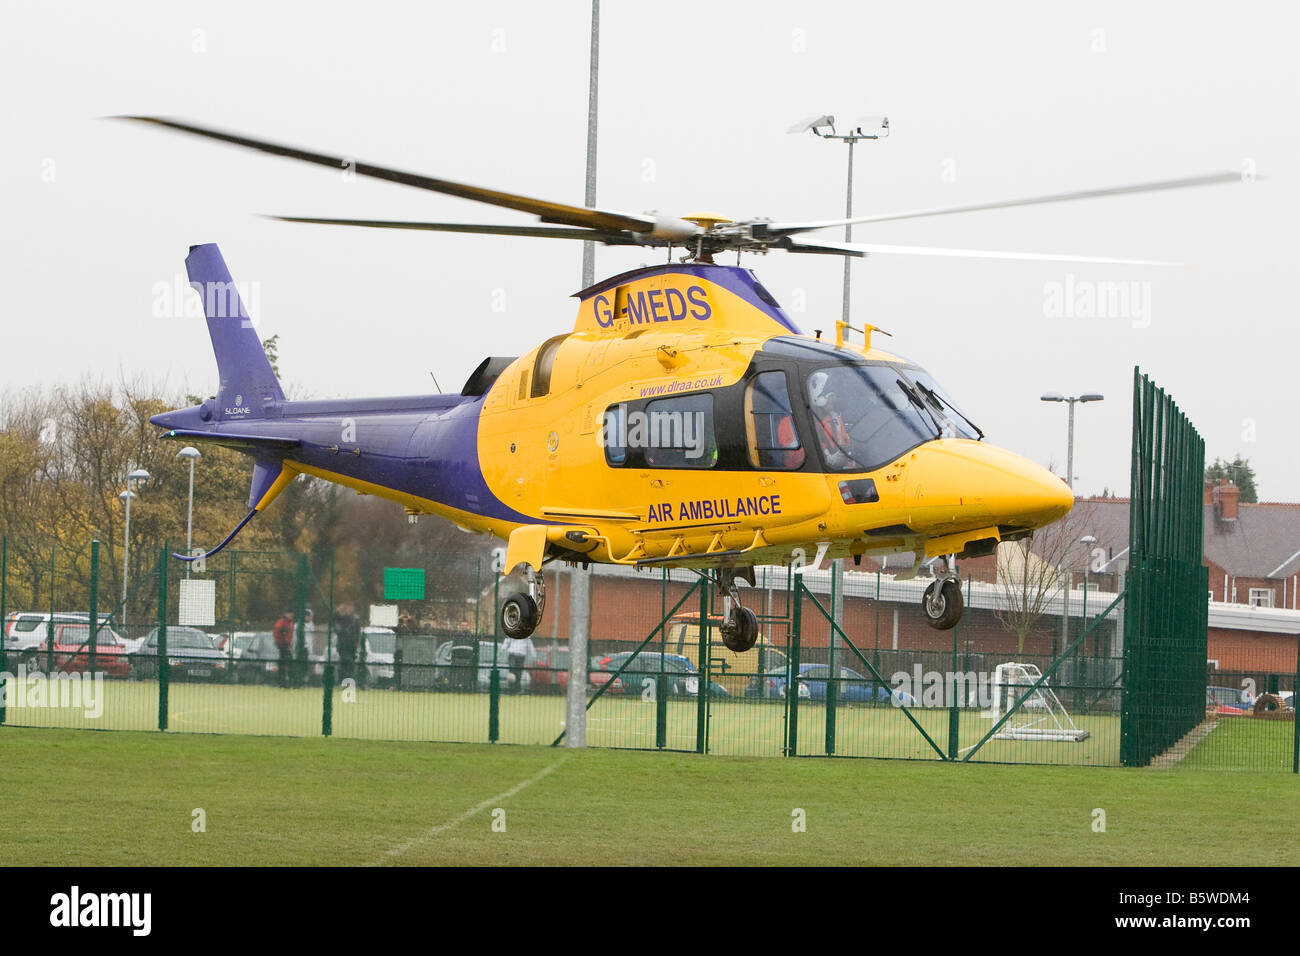 Derbyshire leicestershire and Rutland Agusta 109 air ambulance helicopter Stock Photo